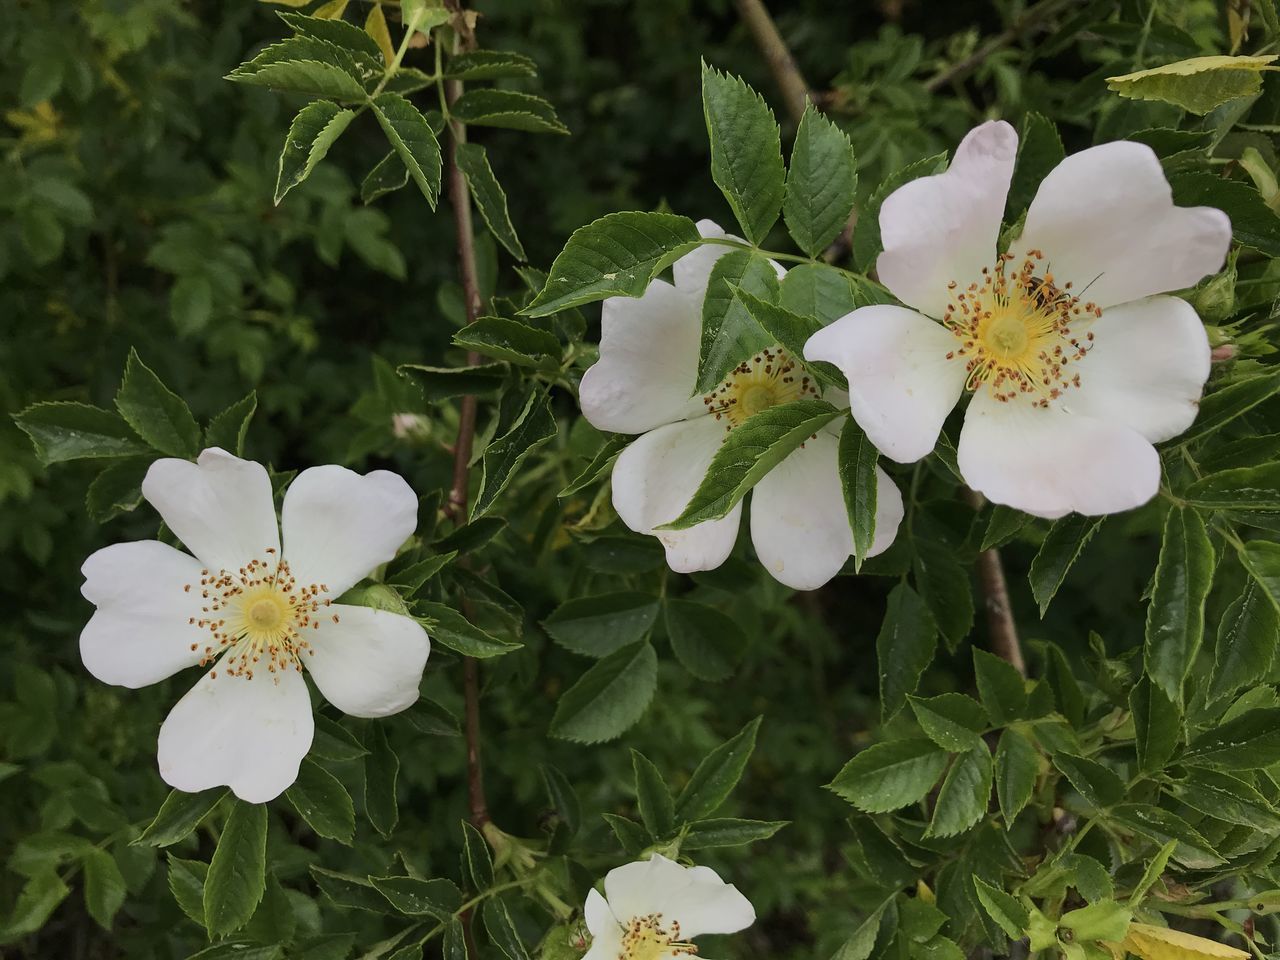 CLOSE-UP OF WHITE FLOWERING PLANT WITH FLOWERS